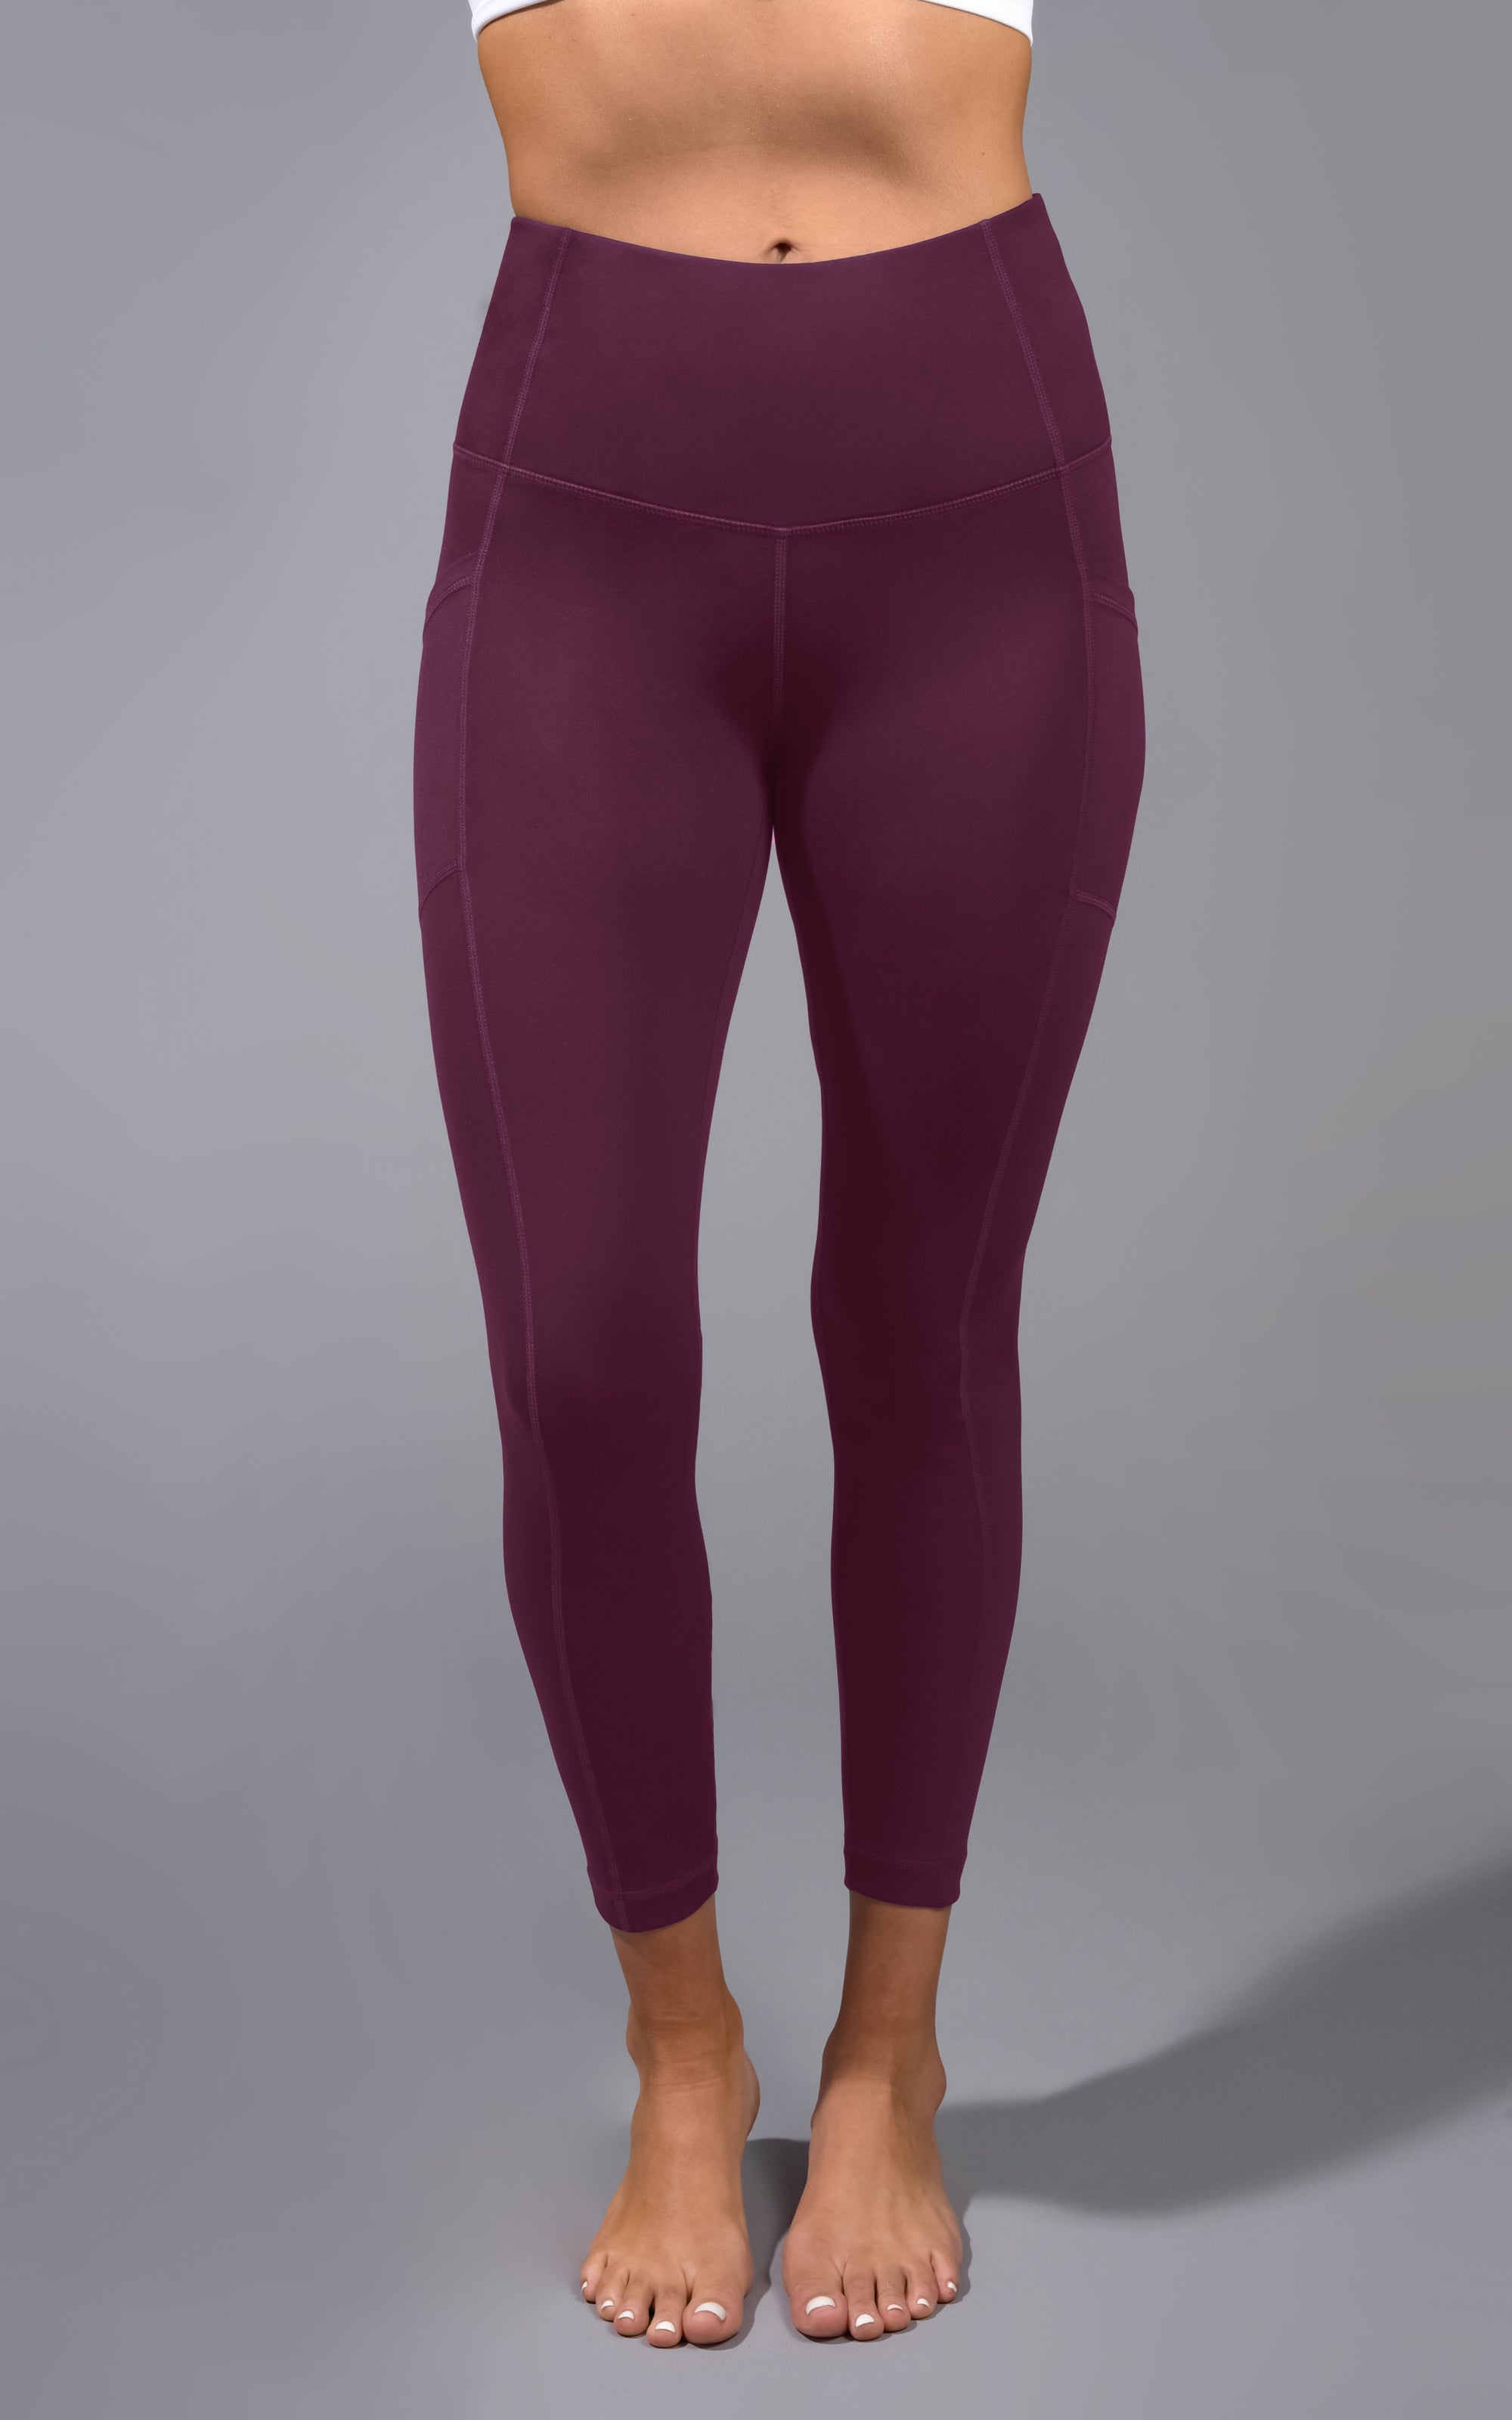 Yogalicious Lux High Waist Leggings in Mauve Size XS - $14 - From